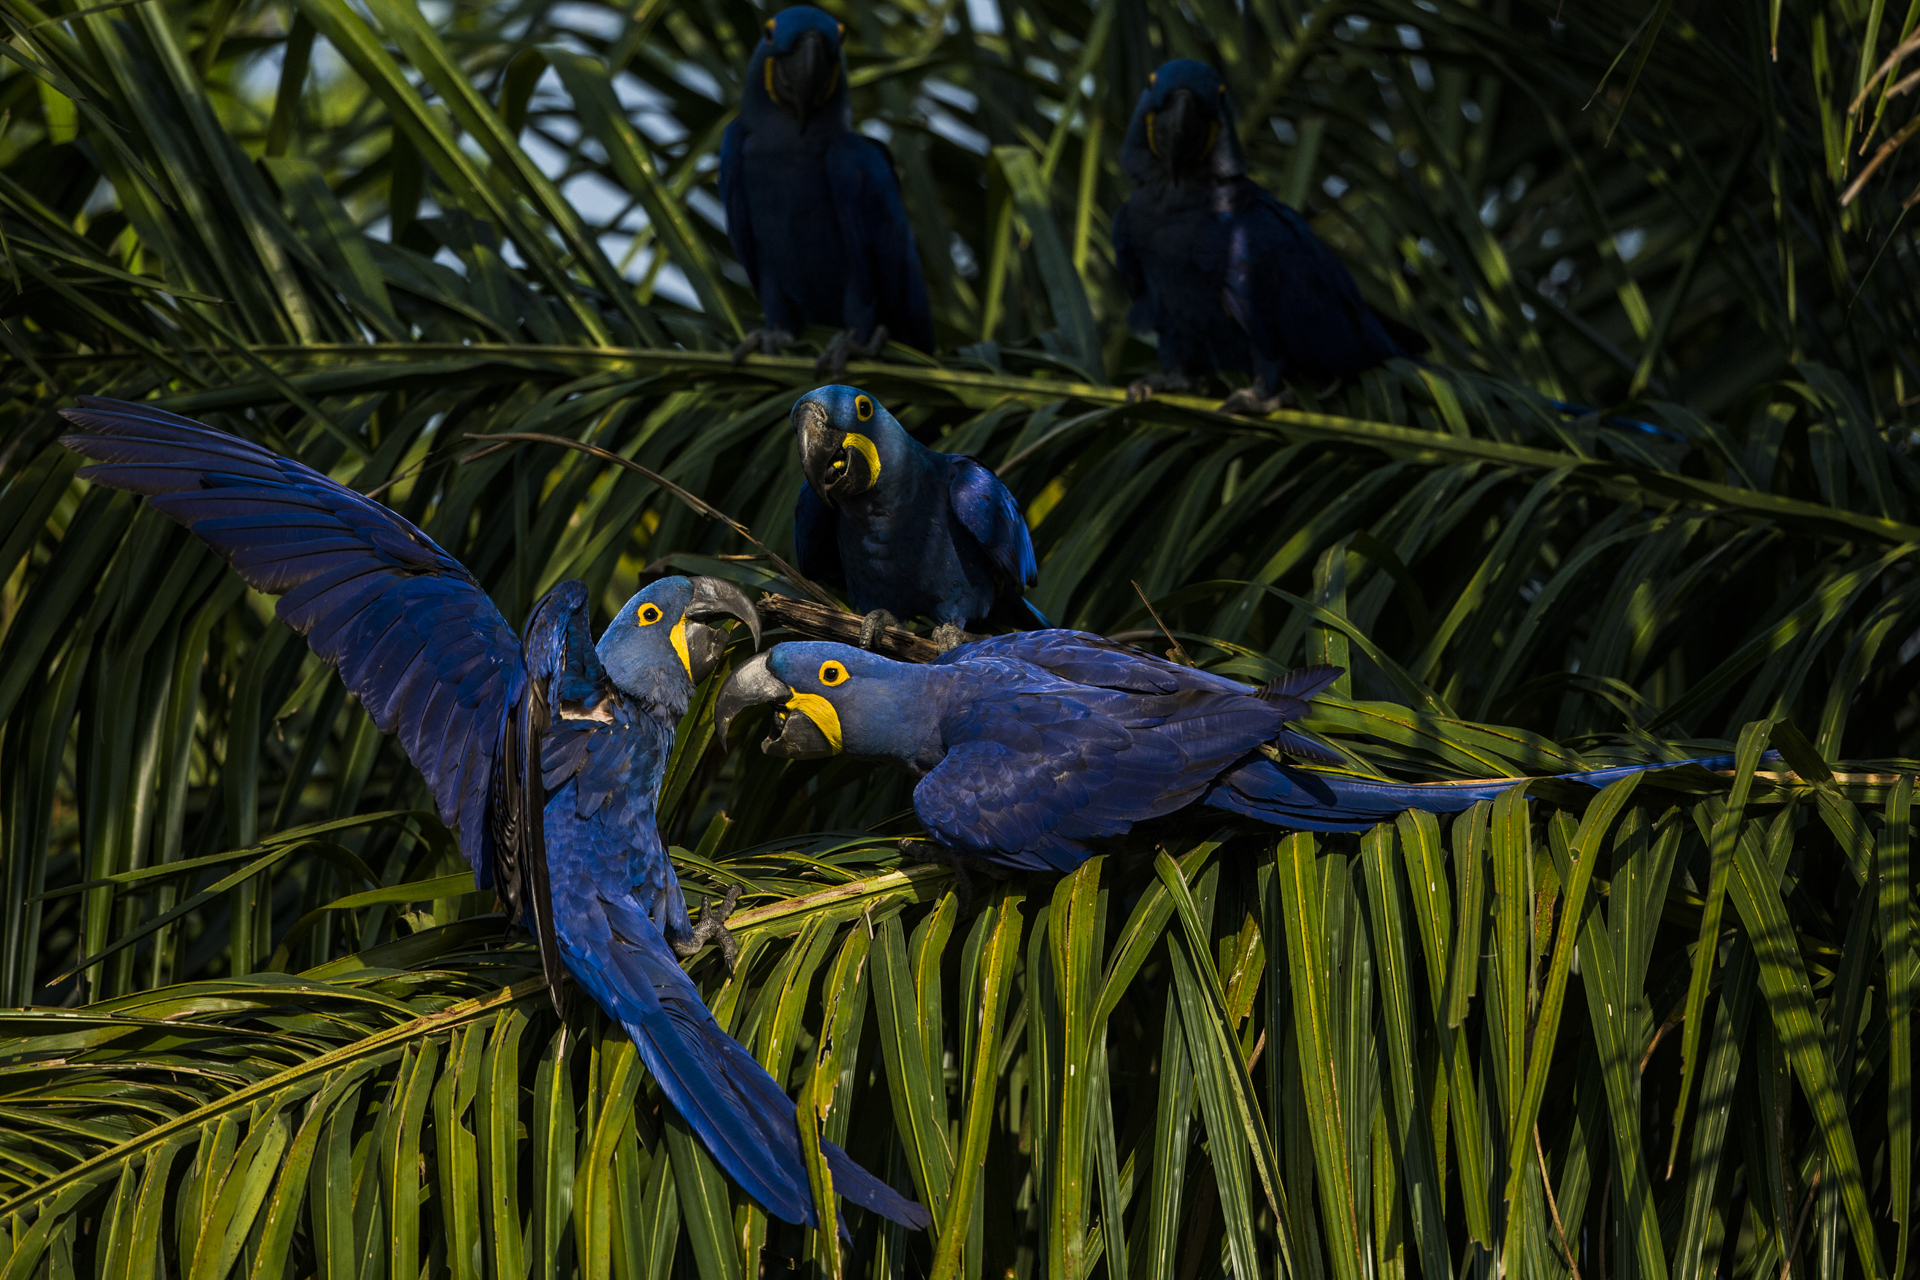  Hyacinth macaws squabble over palm nuts.&nbsp; 